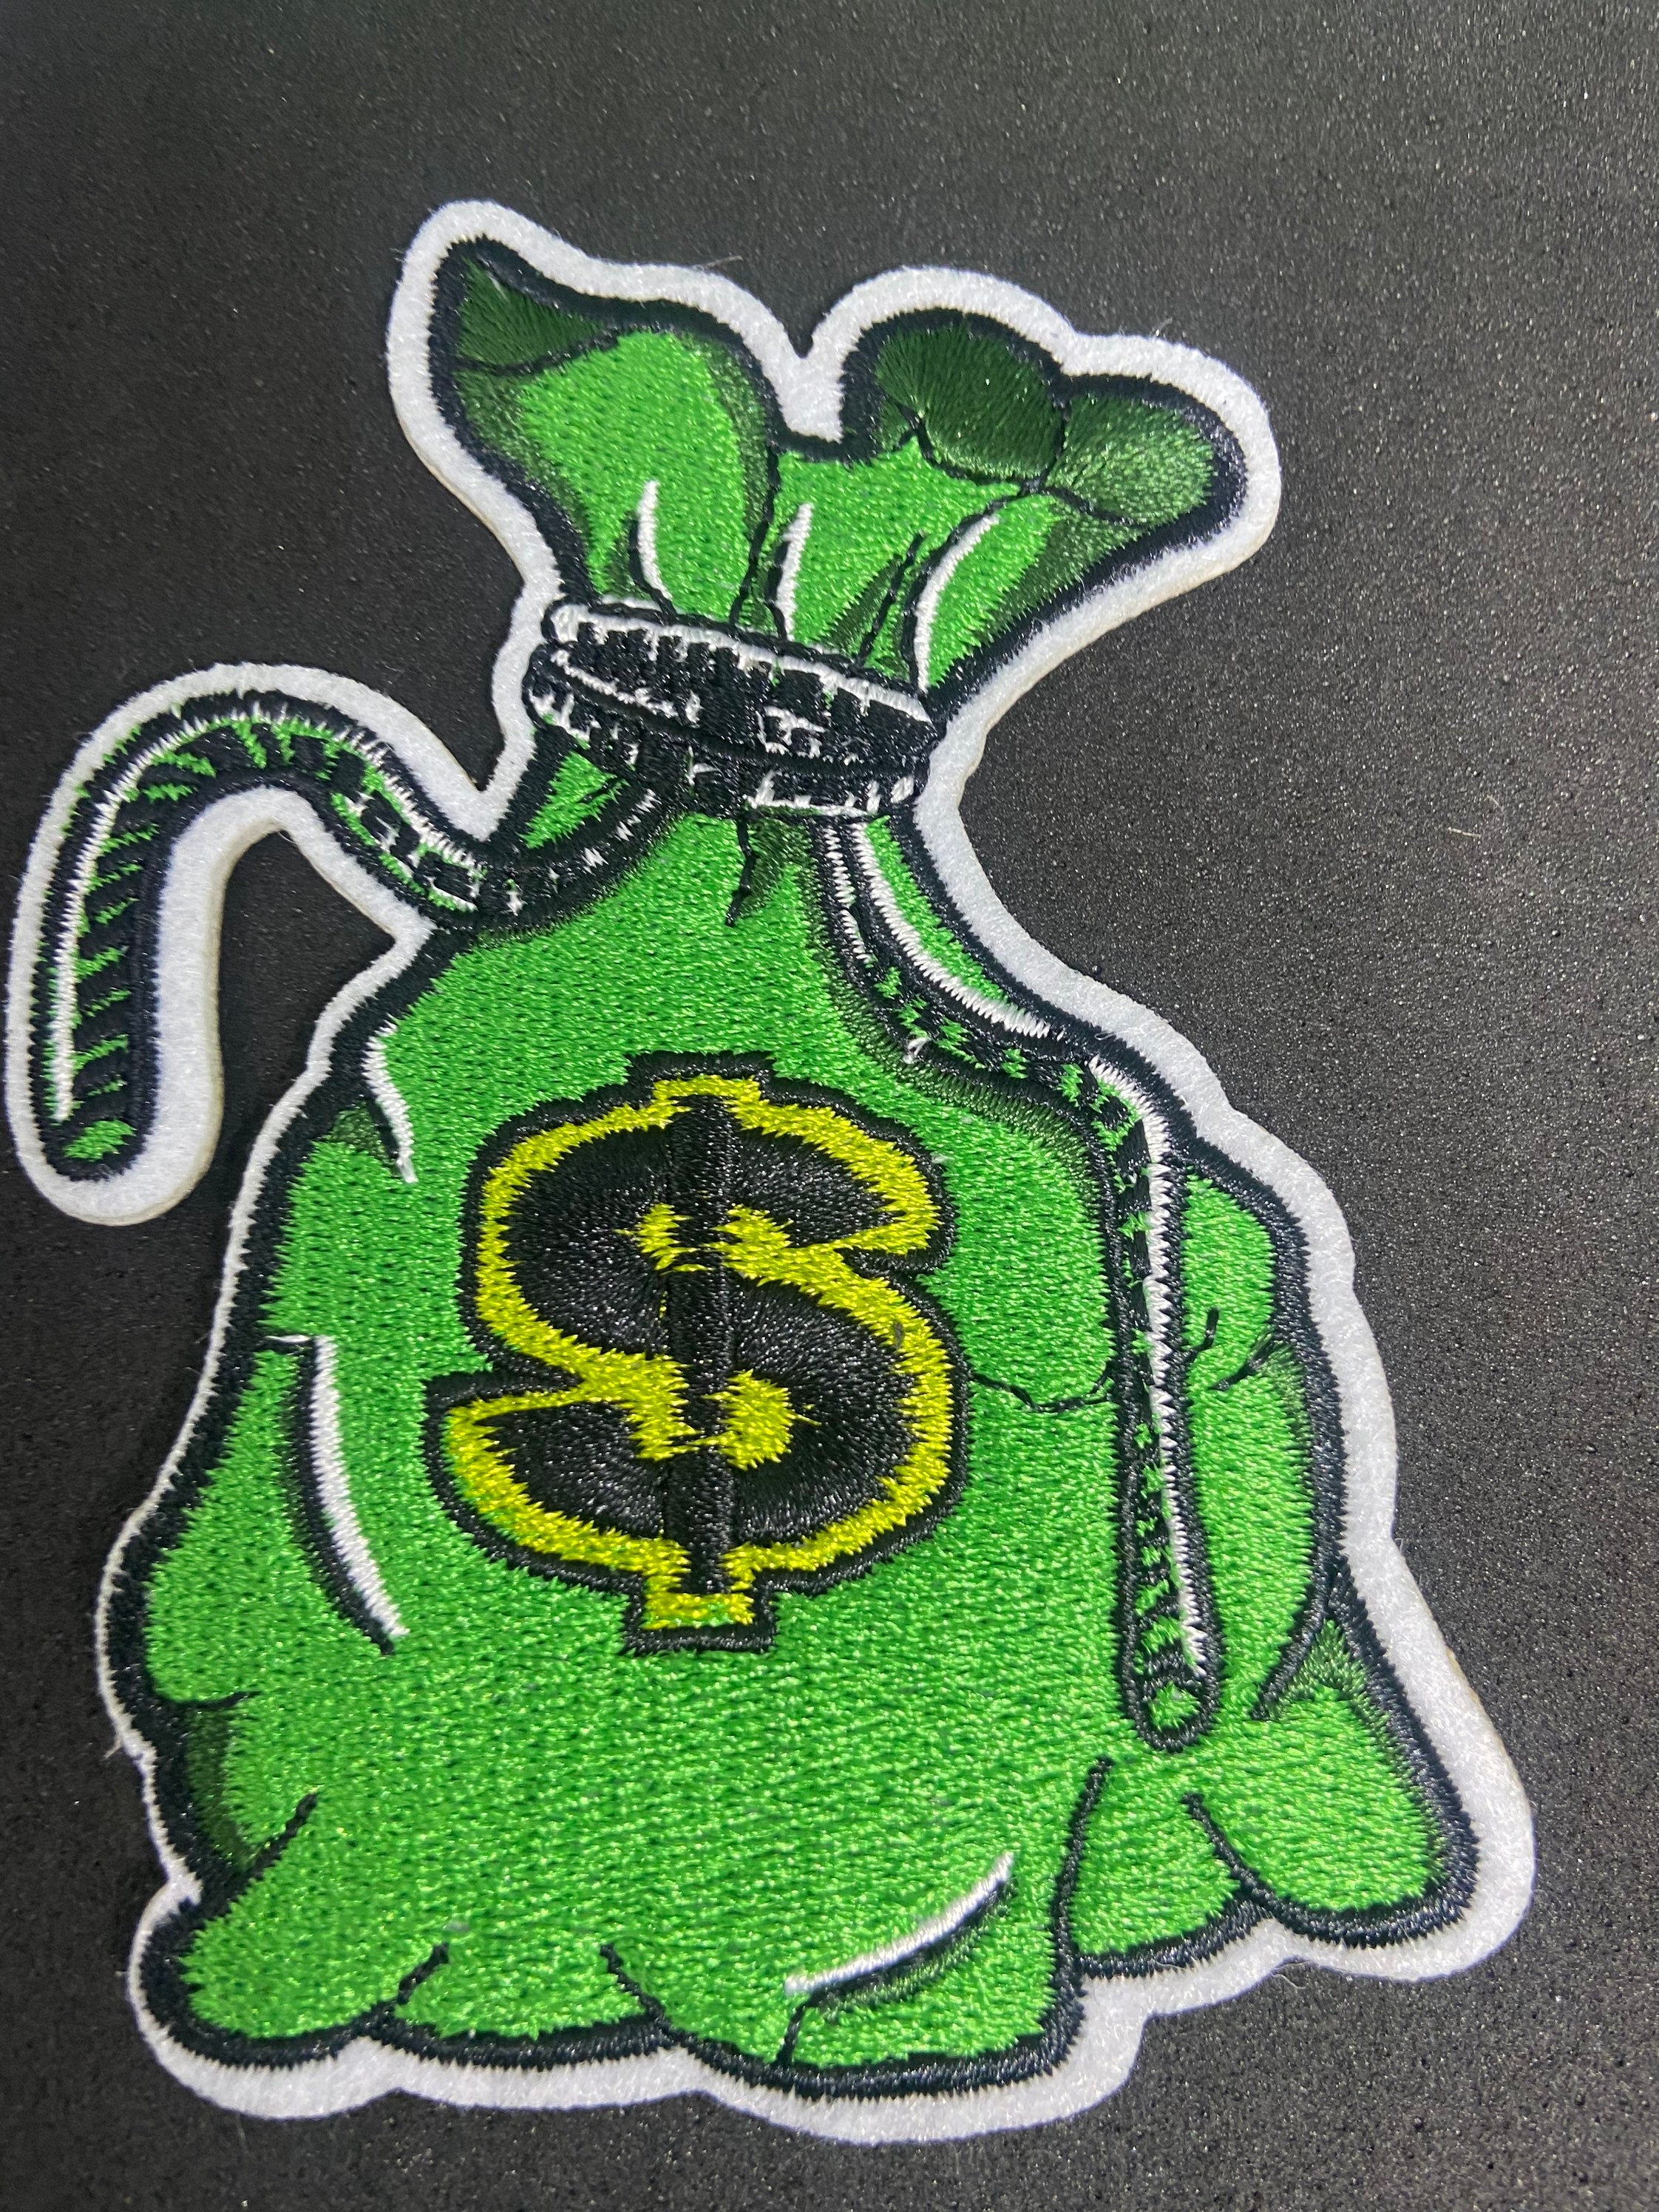 Money Bags|Burning Cash|Money Stack| Iron on  Patch Collection